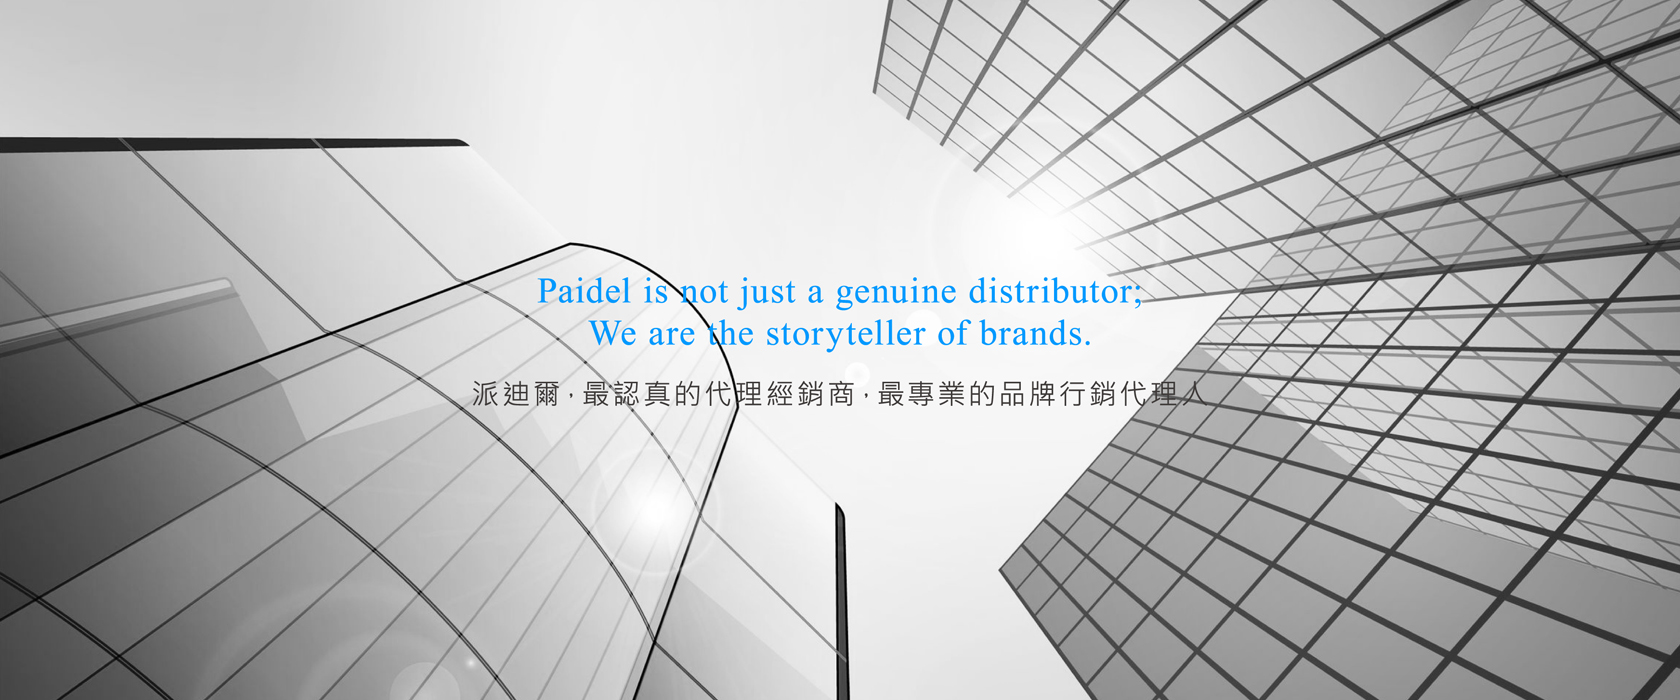 Paidel is not just a genuine distributor;We are the storyteller of brands.派迪爾，最認真的代理經銷商，最專業的品牌行銷代理人